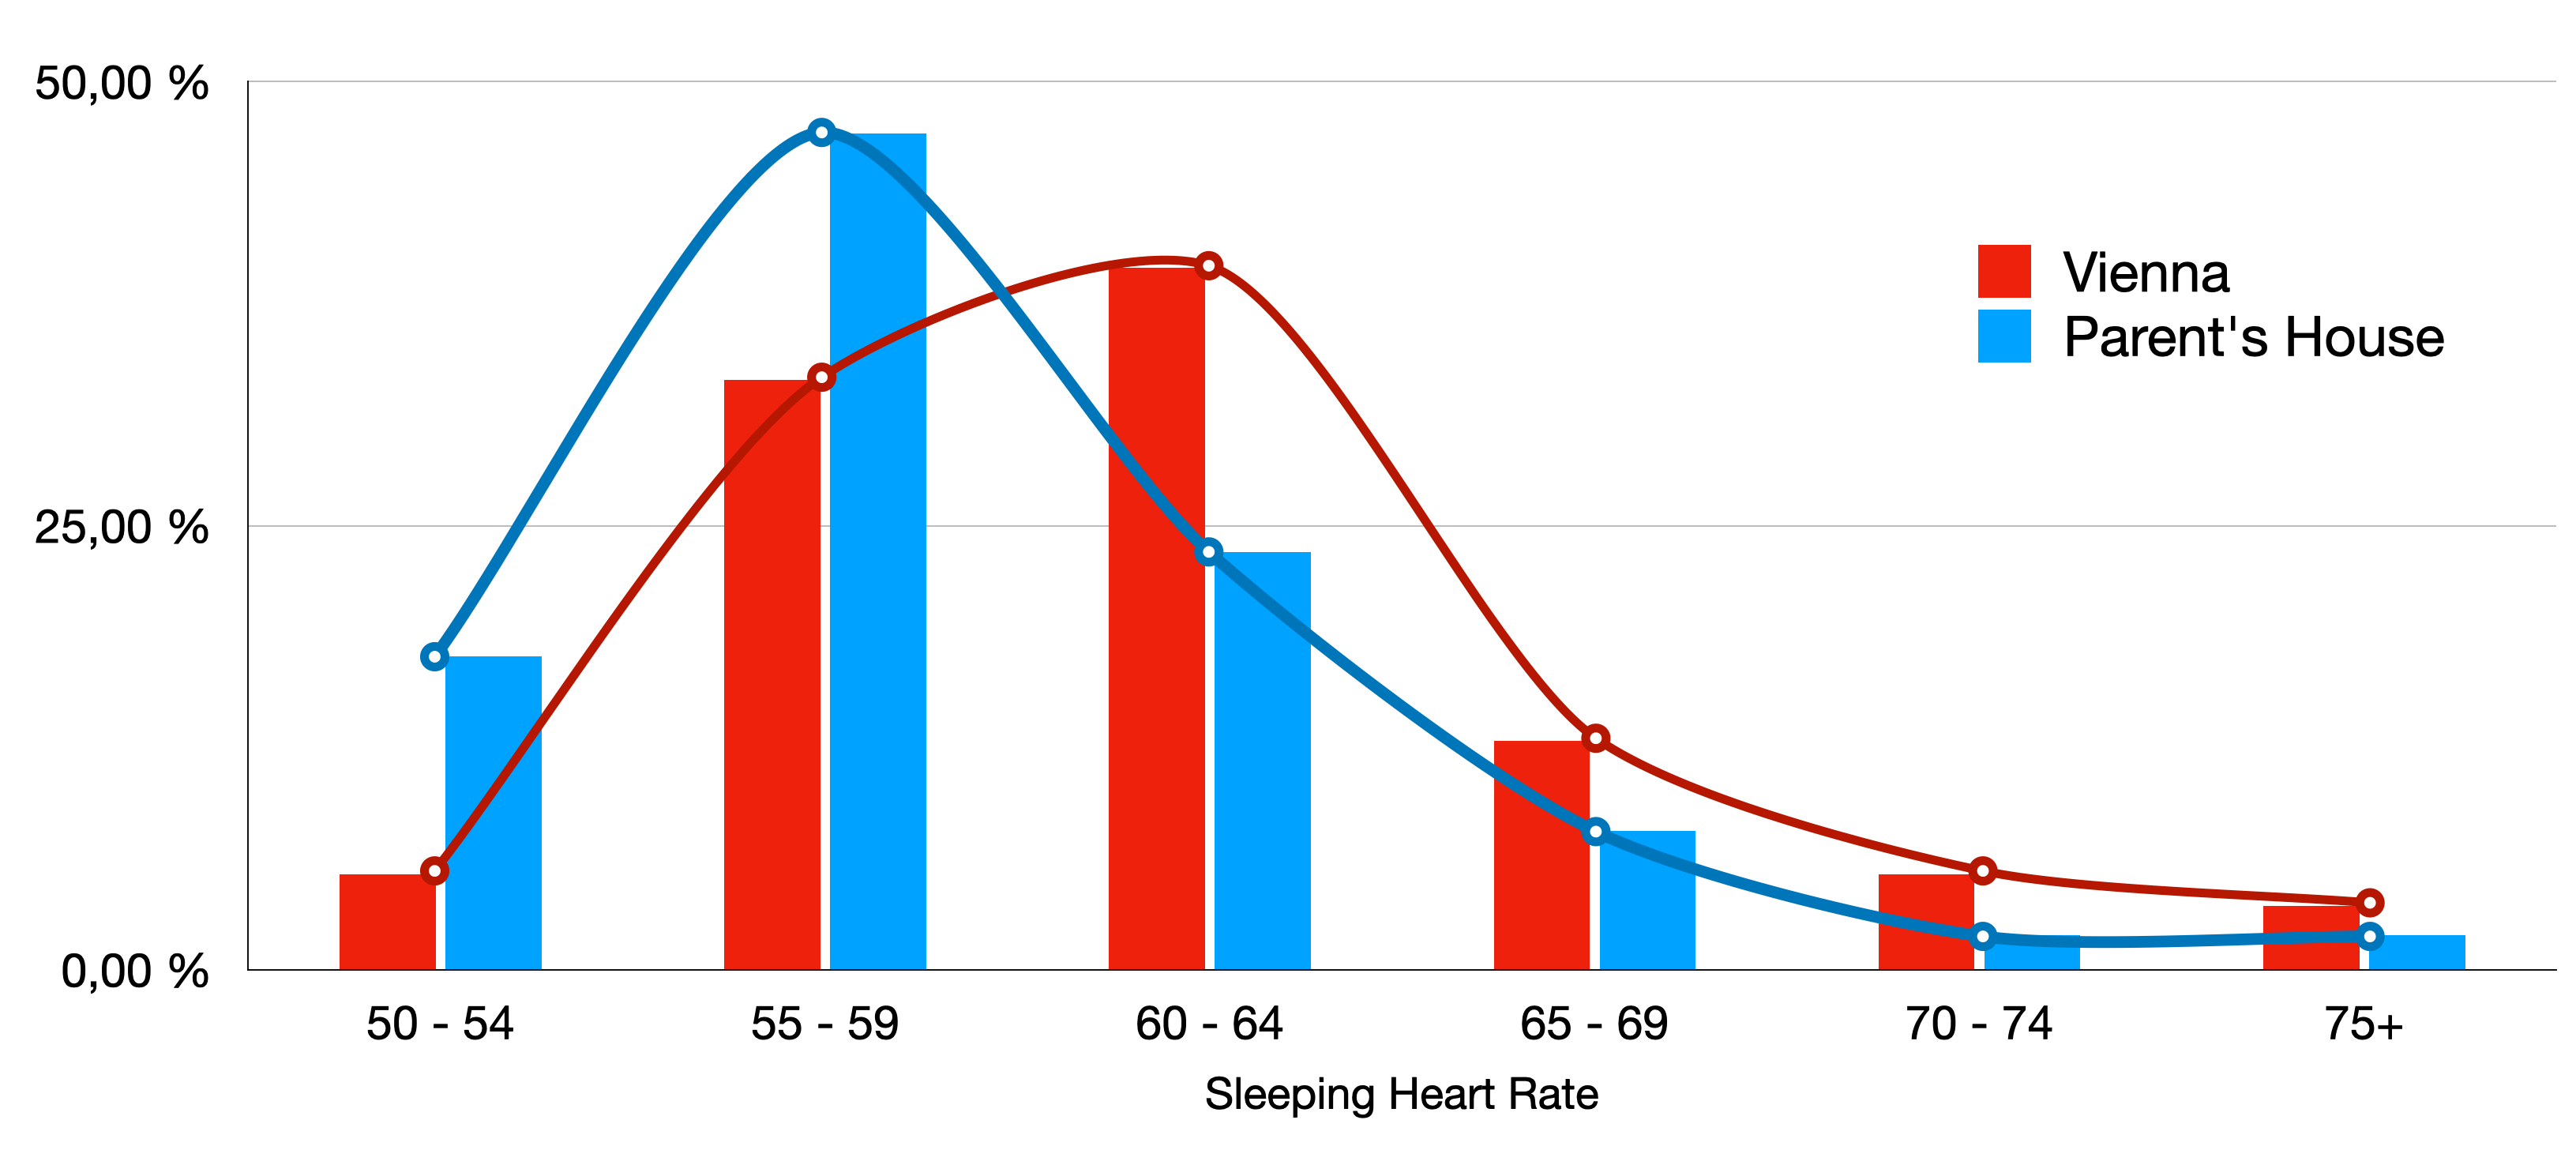 Resting Heart Rate based on location